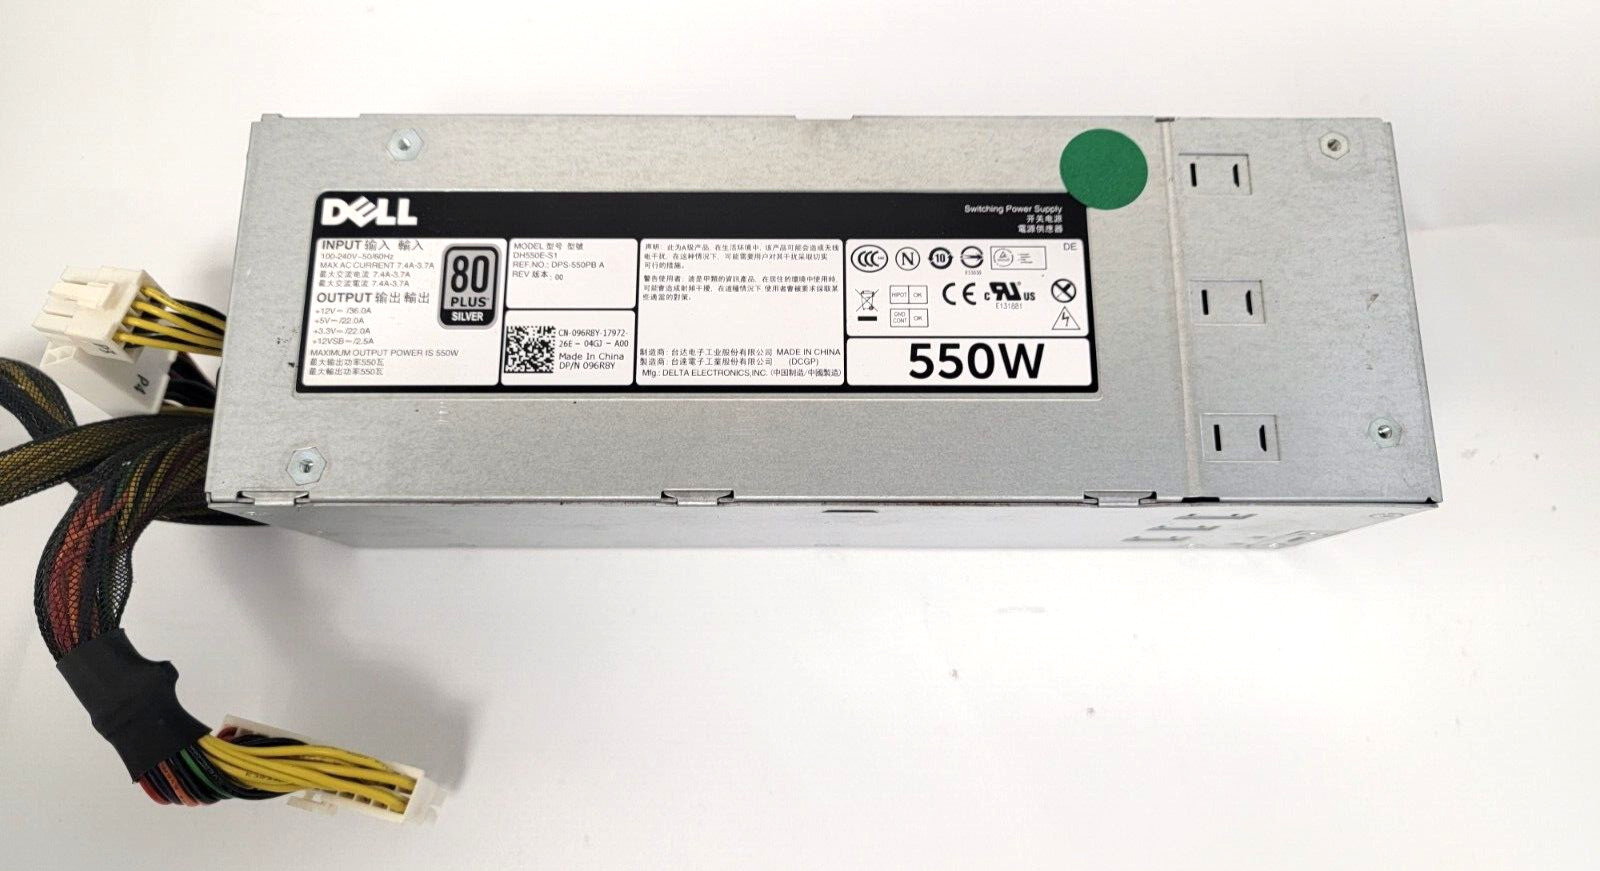 Dell T420 R520 550W Server Switching Power Supply DH550E-S1 | 096R8Y - Tested